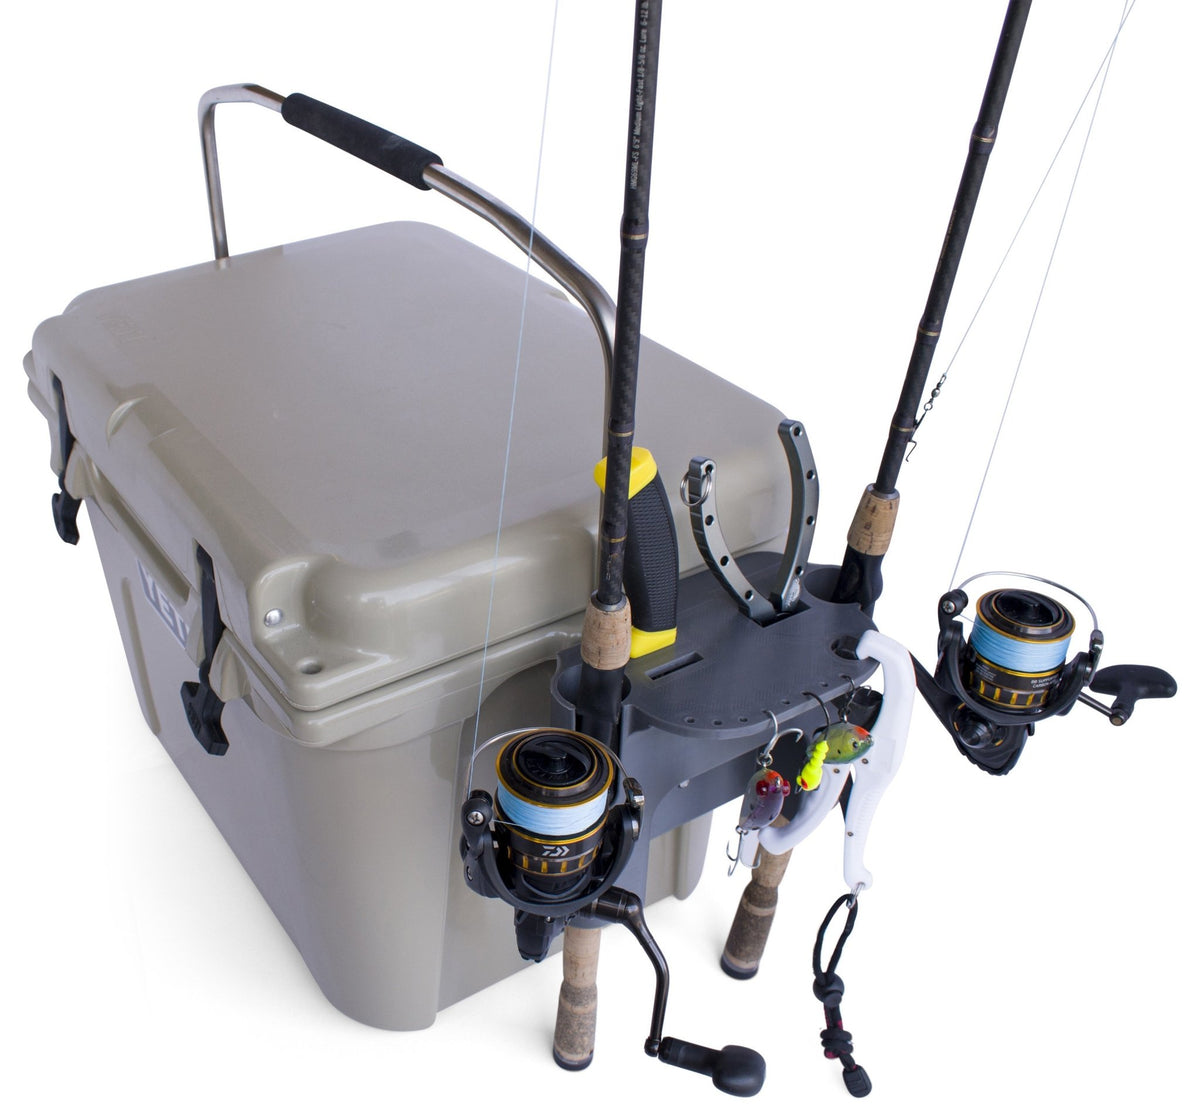 fish cooler - companies search